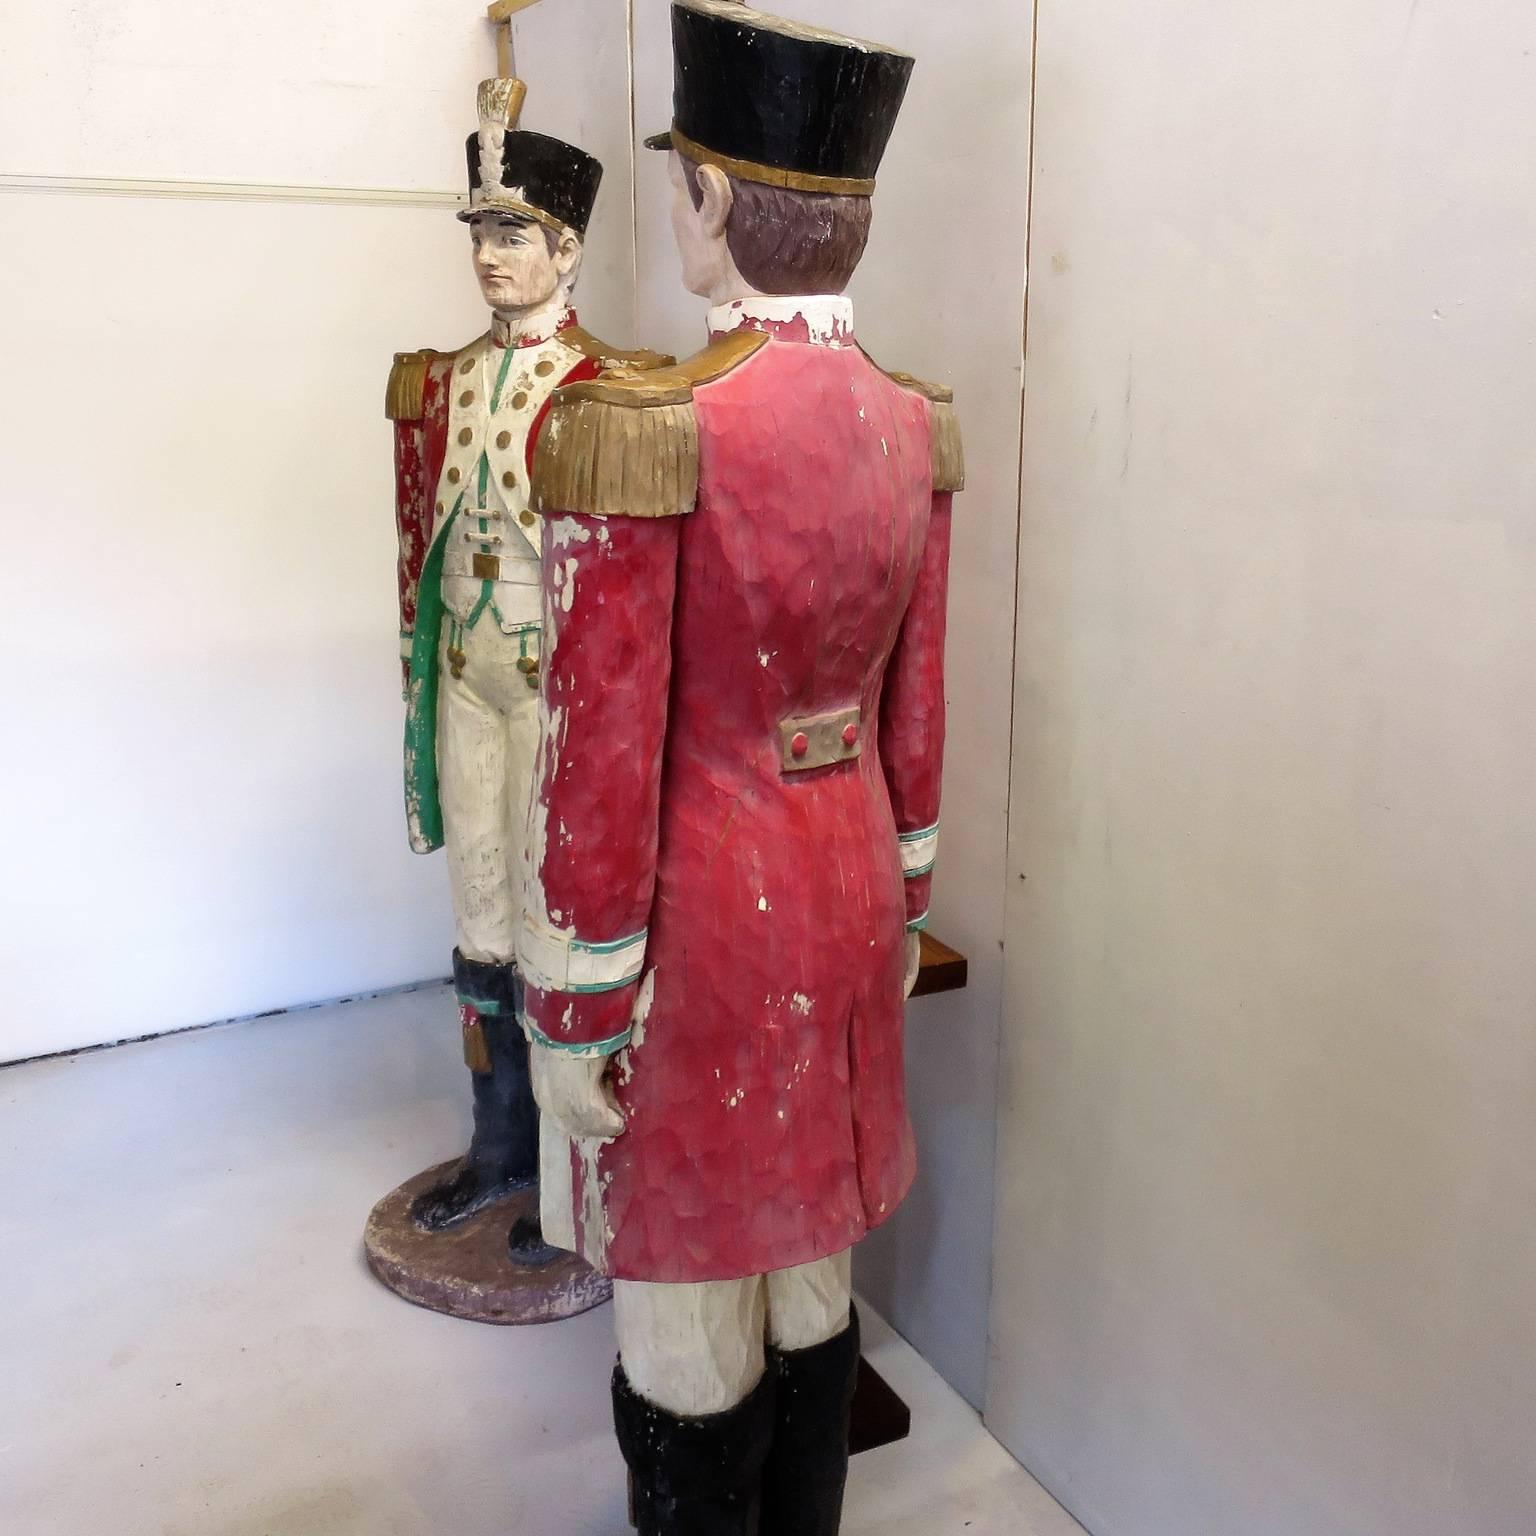 20th Century Pair of Handsome Lifesize Military Guards in Uniform Midcentury Sculptures